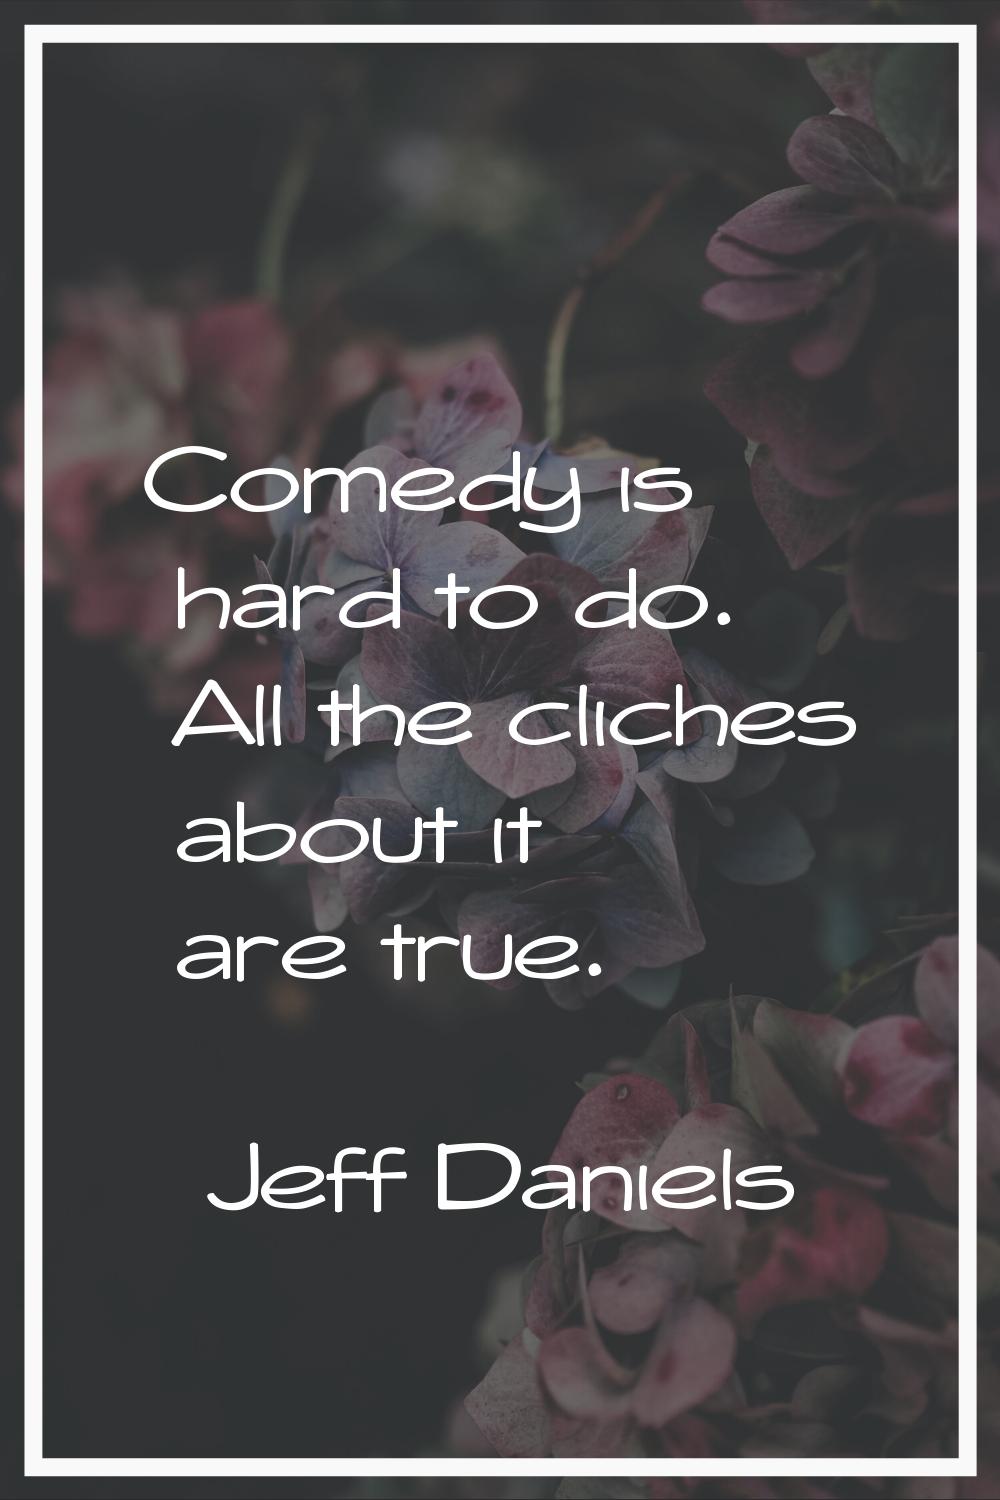 Comedy is hard to do. All the cliches about it are true.